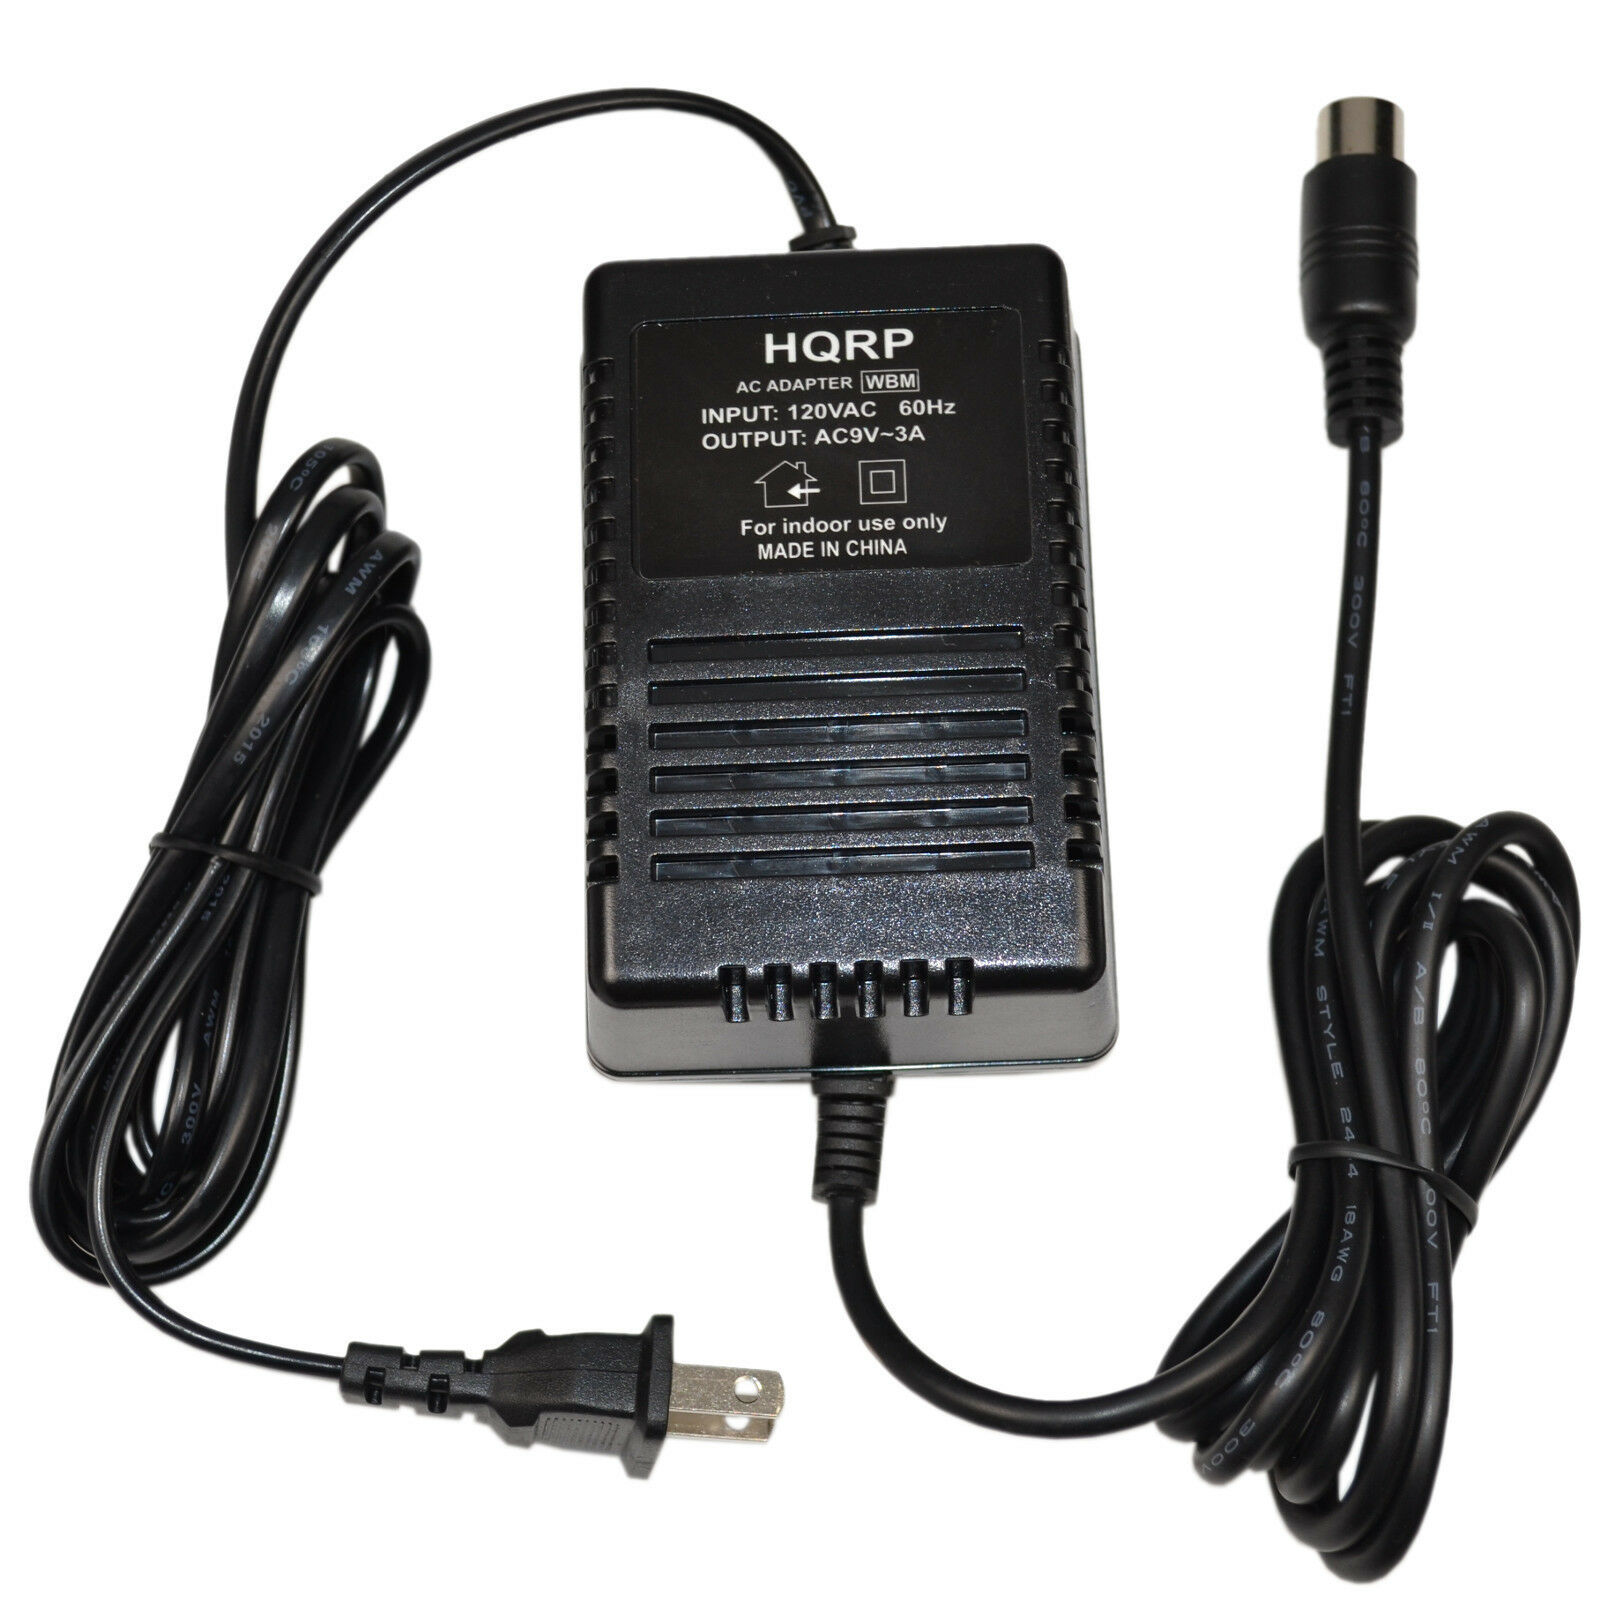 AC Power Adapter for Korg KM2, N1R, N5, TR88, SP500, TP-2, ESX-1, DL8000R Compatible Brand: For Ko